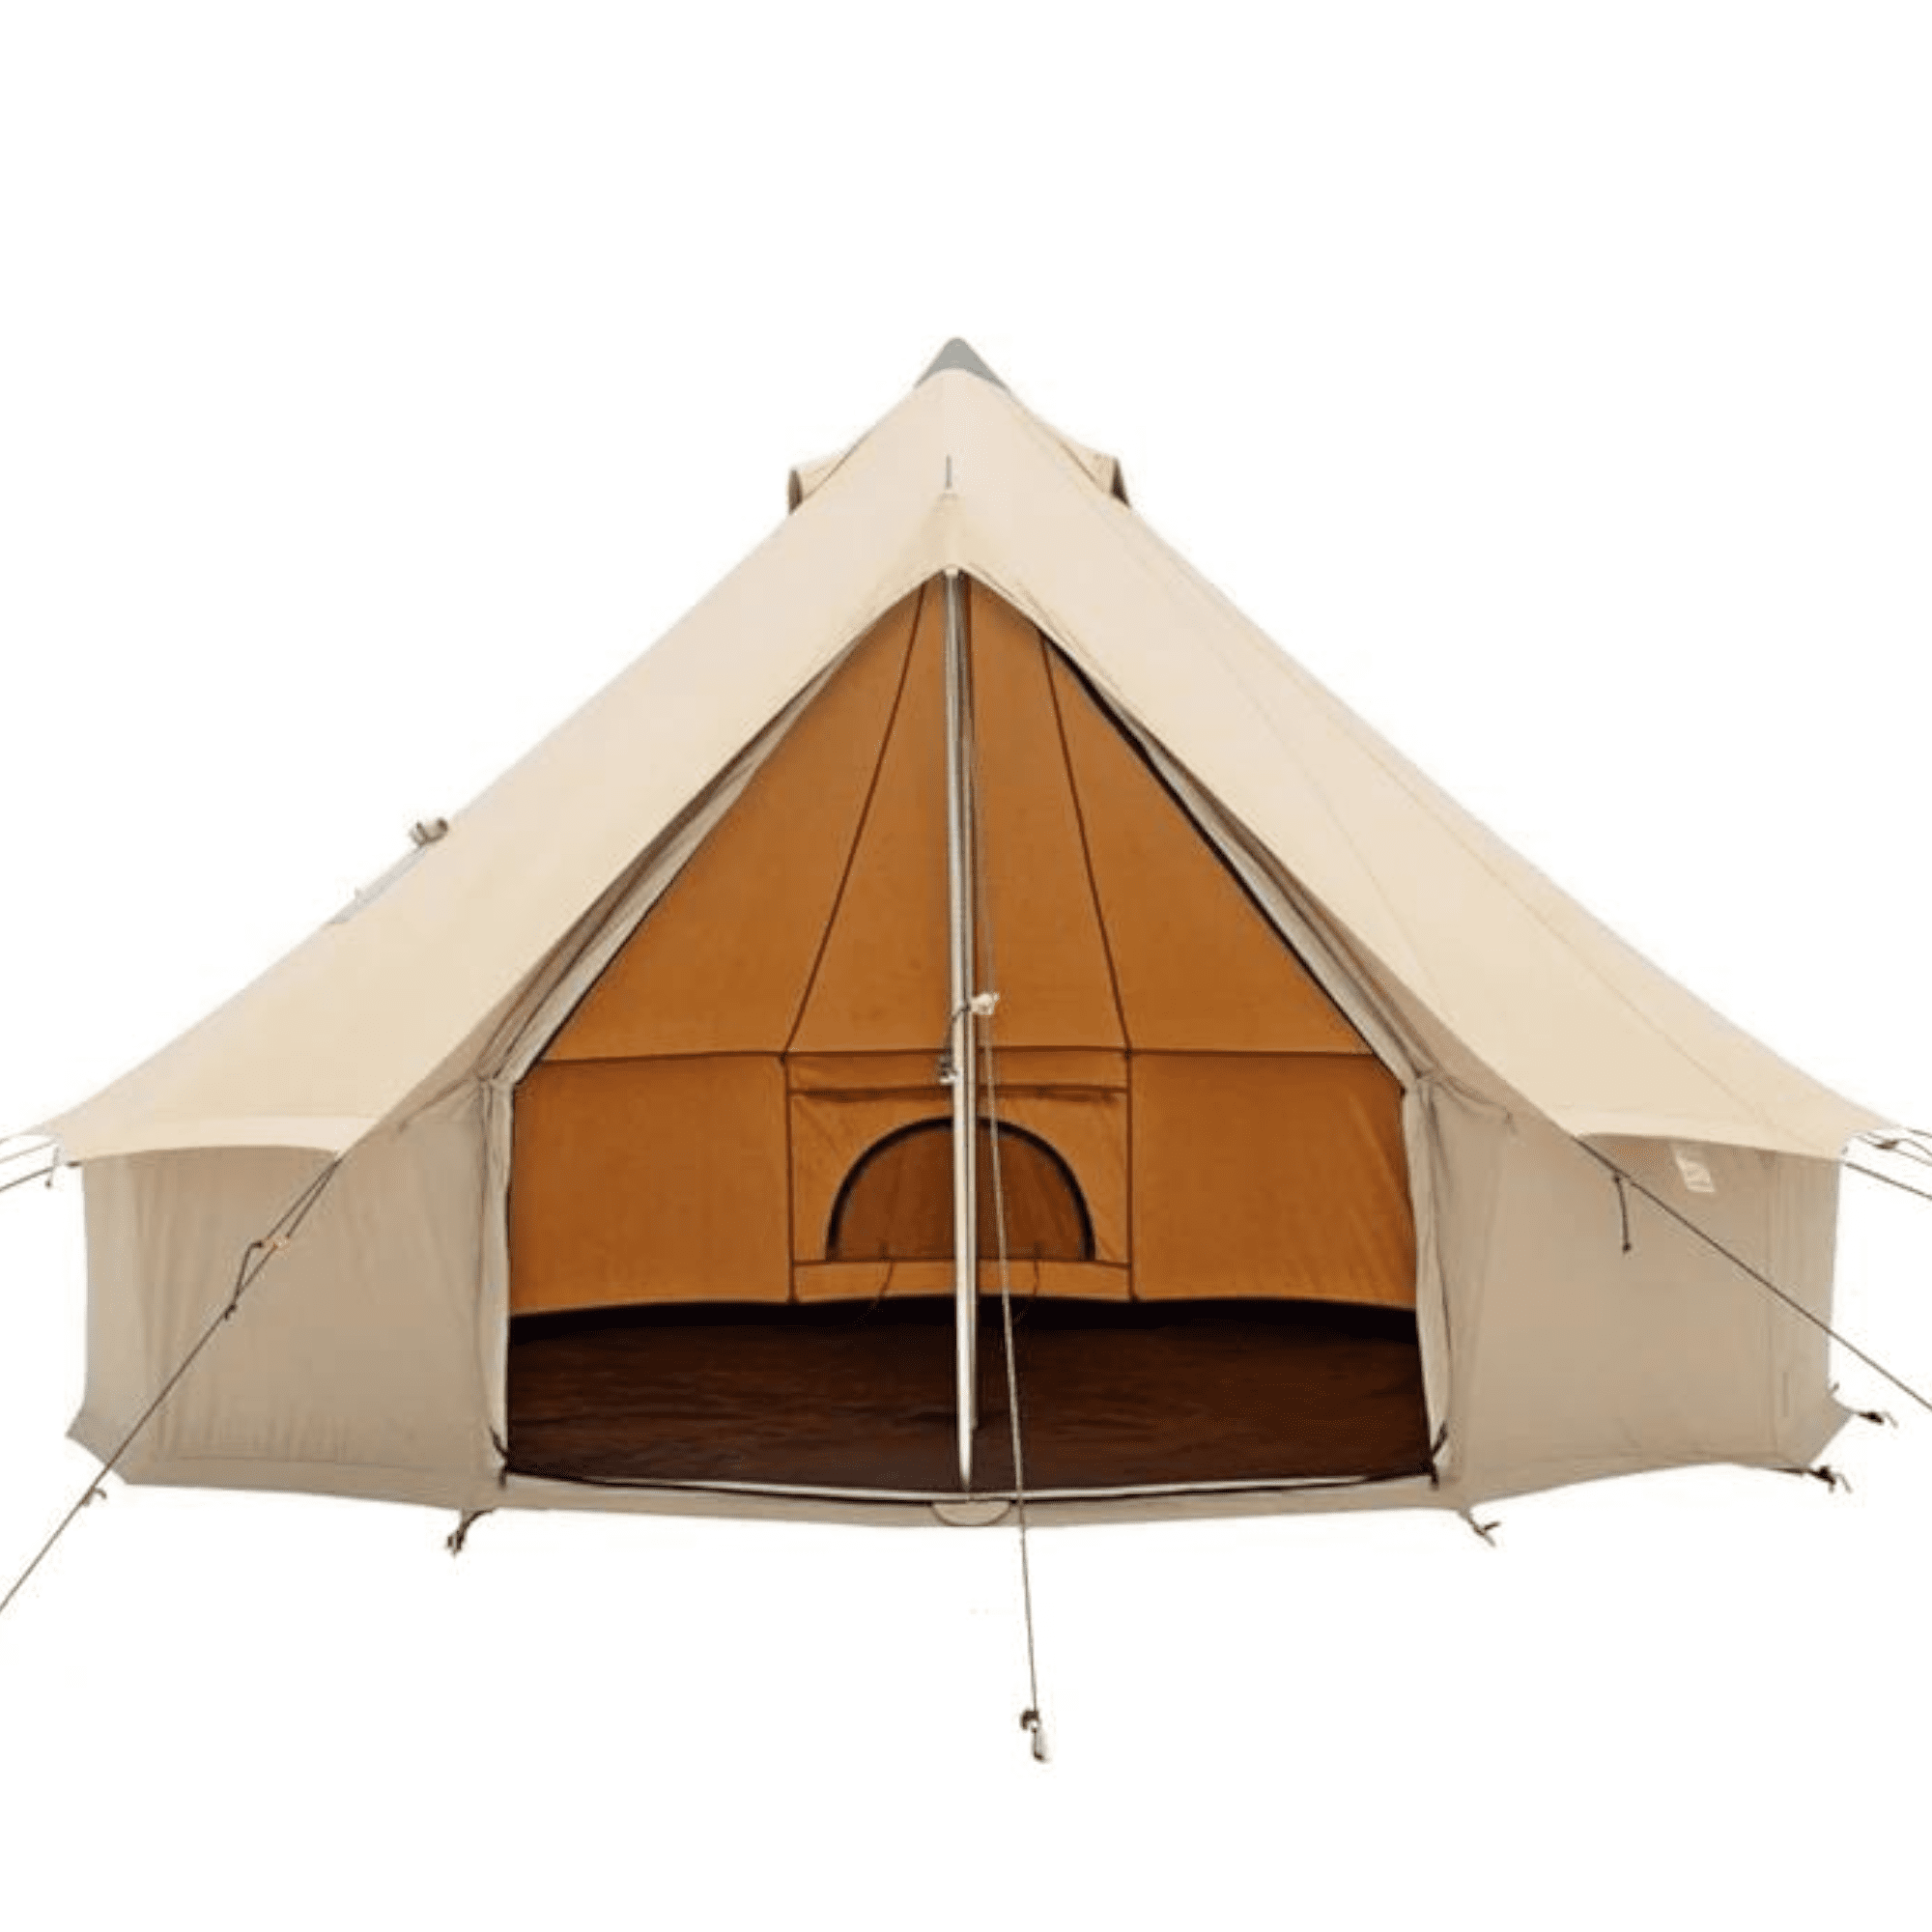 Camping Tent 10 Person Capacity 17' x 9' Waterproof Canvas With Screen Porch 